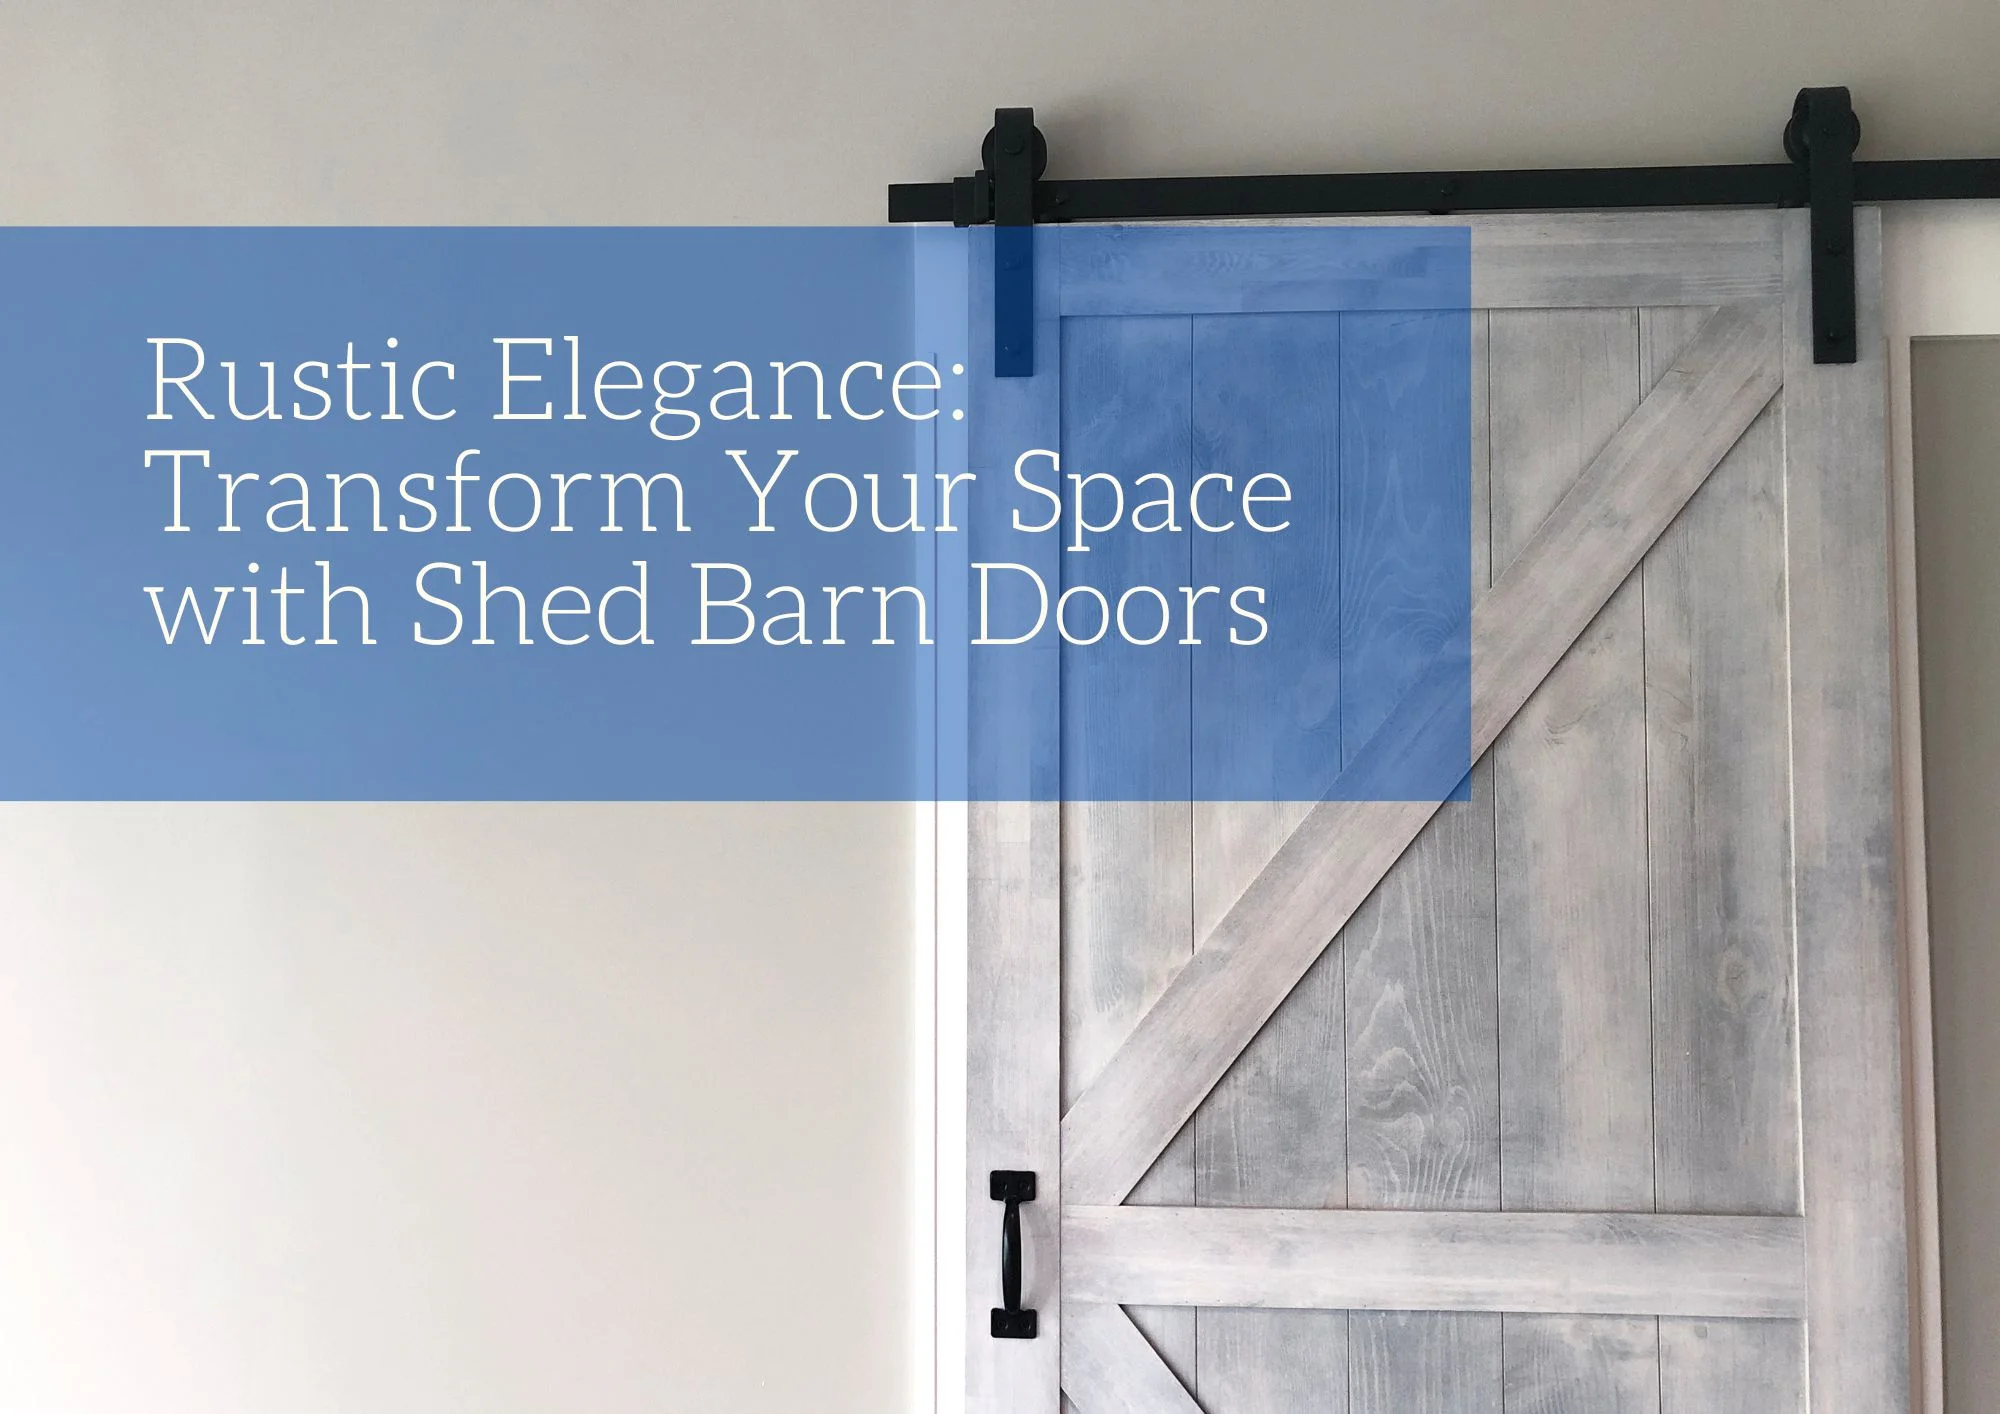 Rustic Elegance: Transform Your Space with Shed Barn Doors